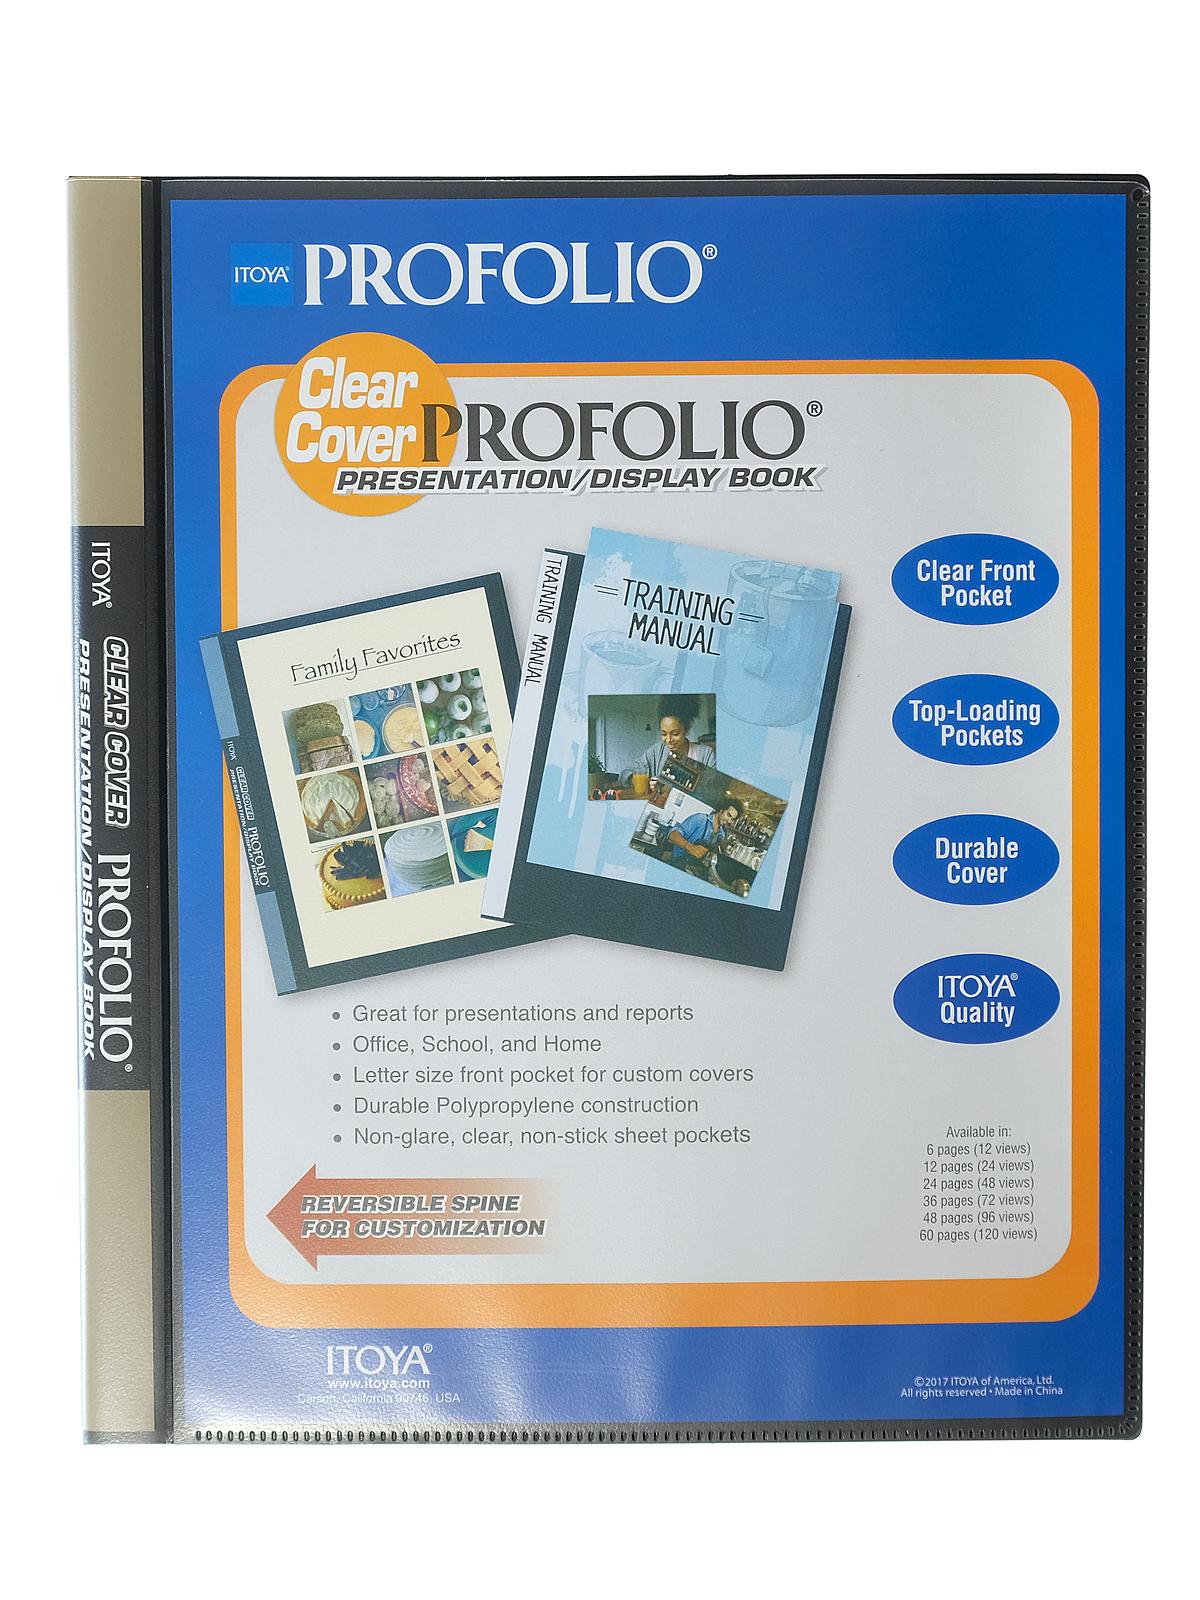 Clear Cover Profolio Presentation Books 12 Pages (24 Views)